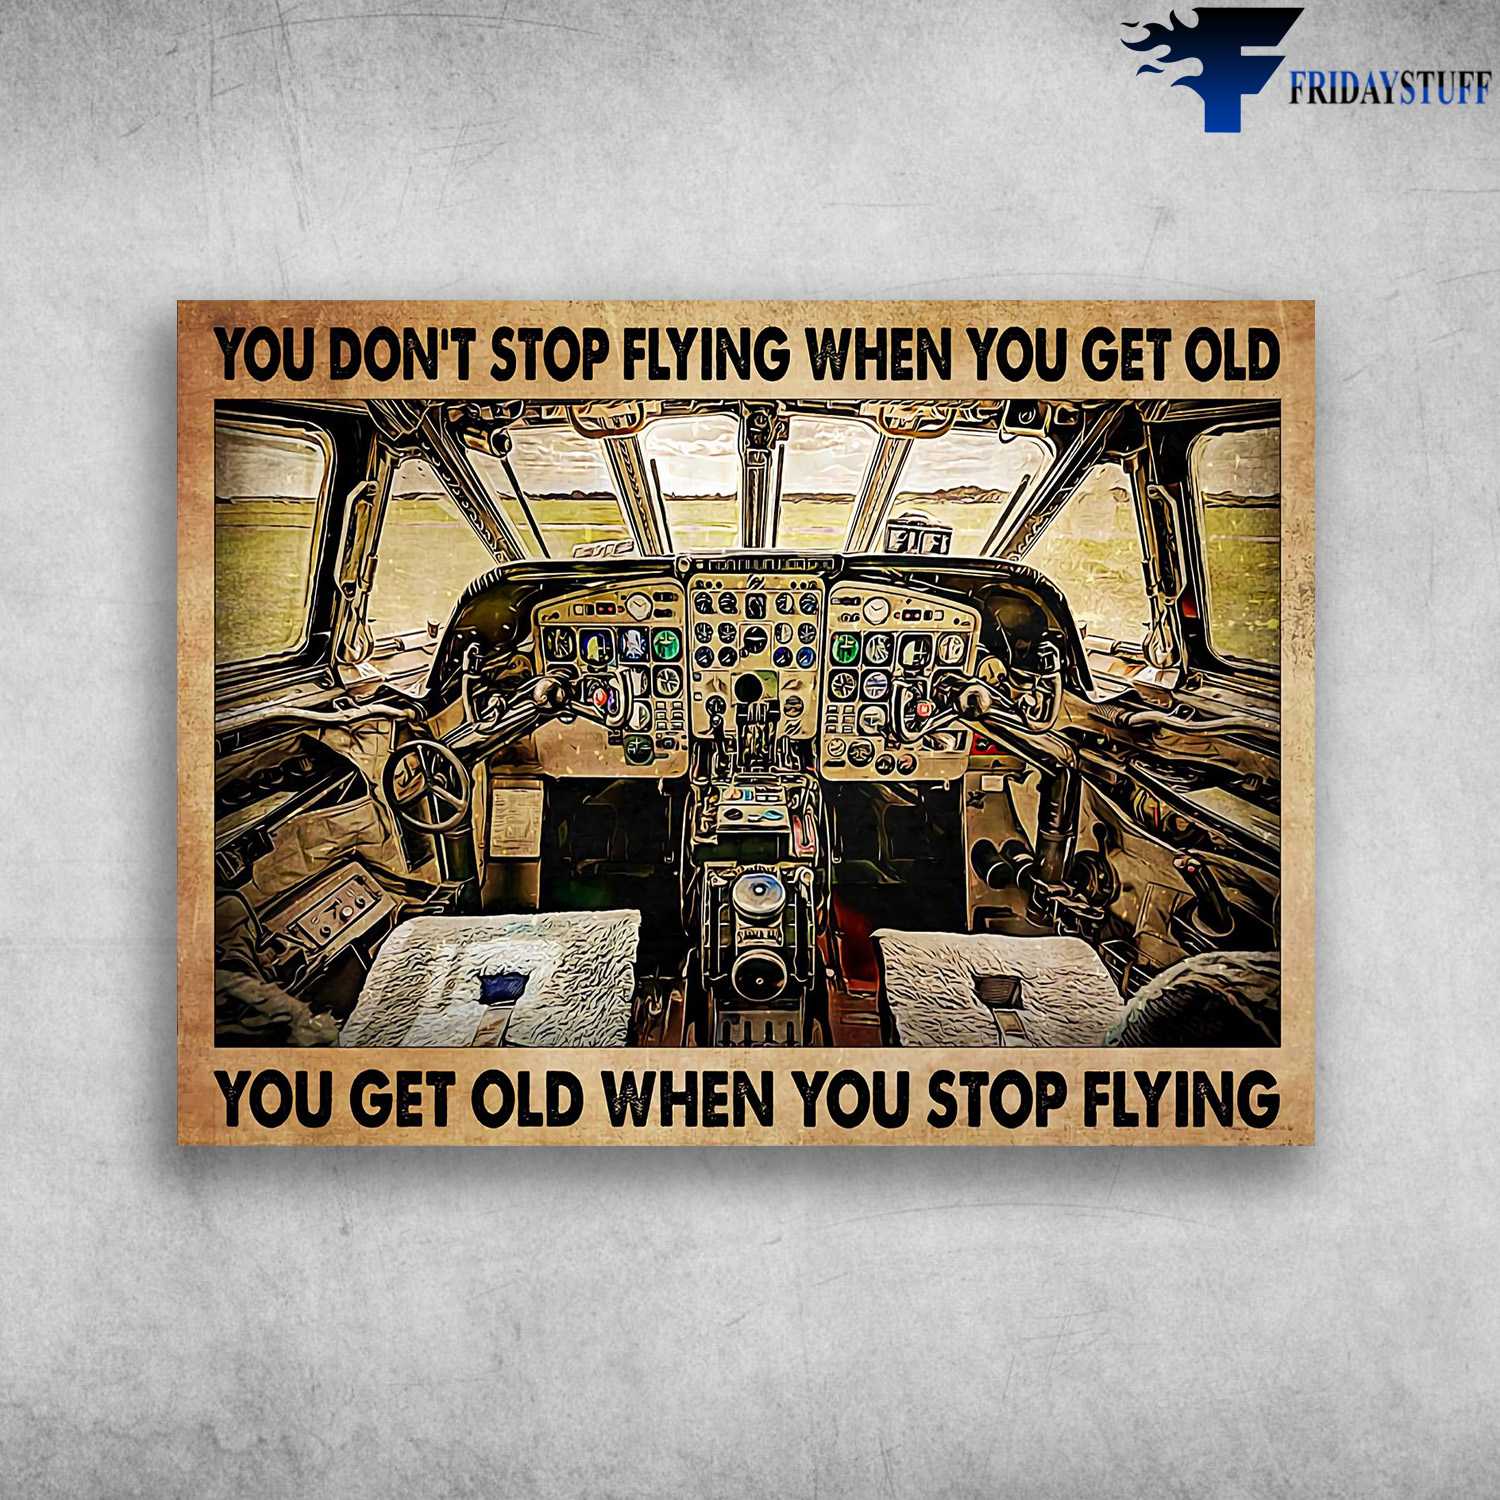 Airplane Cockpit, Pilot Poster - You Don't Stop Flying When You Get Old, You Get Old When You Stop Flying